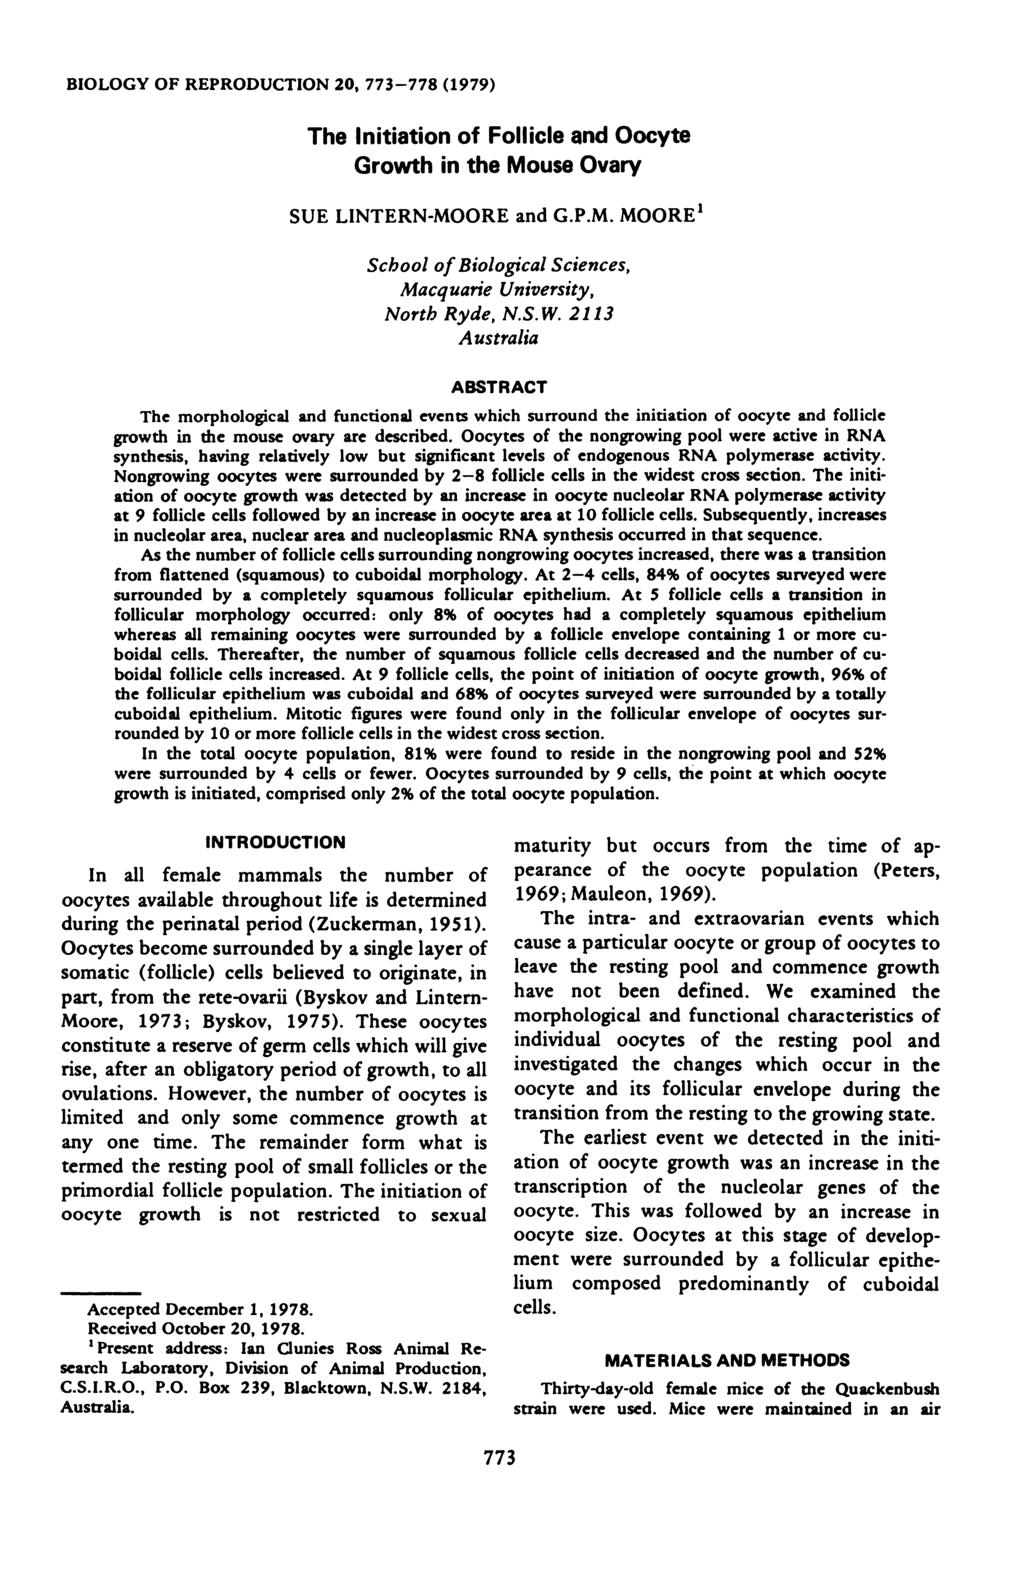 BIOLOGY OF RPRODUCTION 20, 773-778 (1979) The Initiation Follicle and Oocyte Growth in the Mouse Ovary SU LINTRN-MOOR and G.P.M. MOOR School Biological Sciences, Macquarie University, North Ryde, N.S.W.